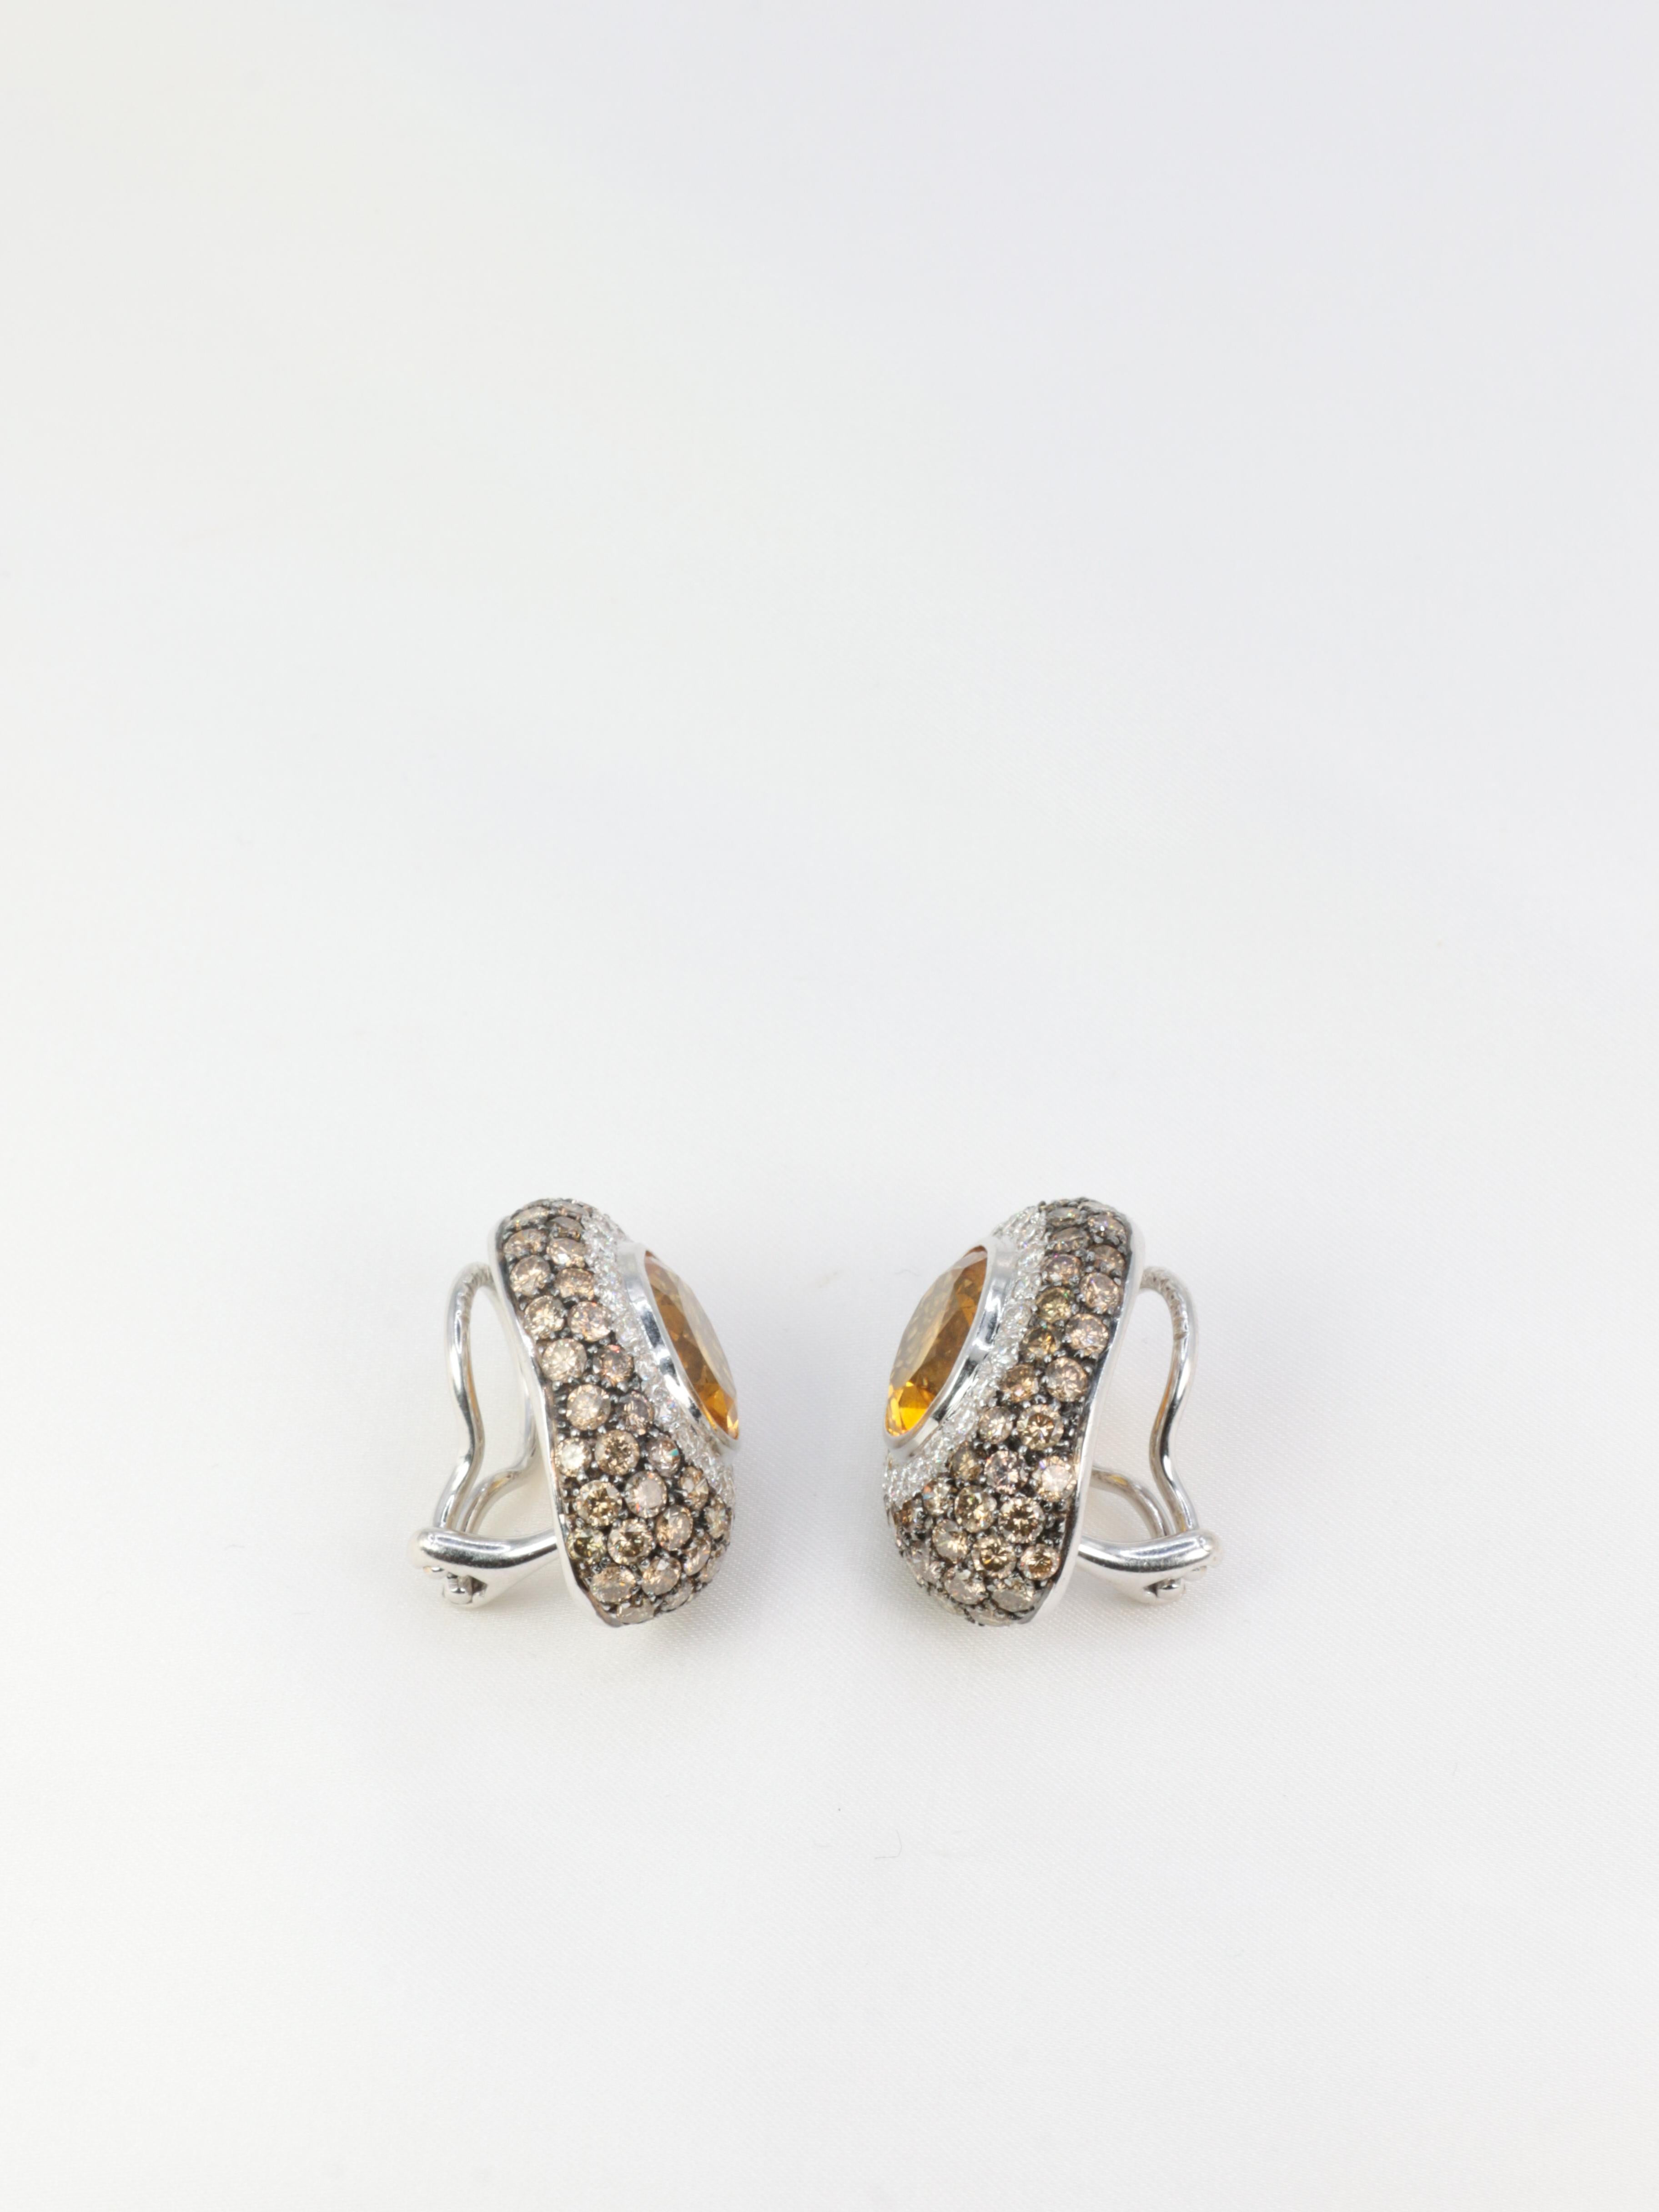 Pair of Gold, Citrines, White and Champagne Diamonds Earrings For Sale 3